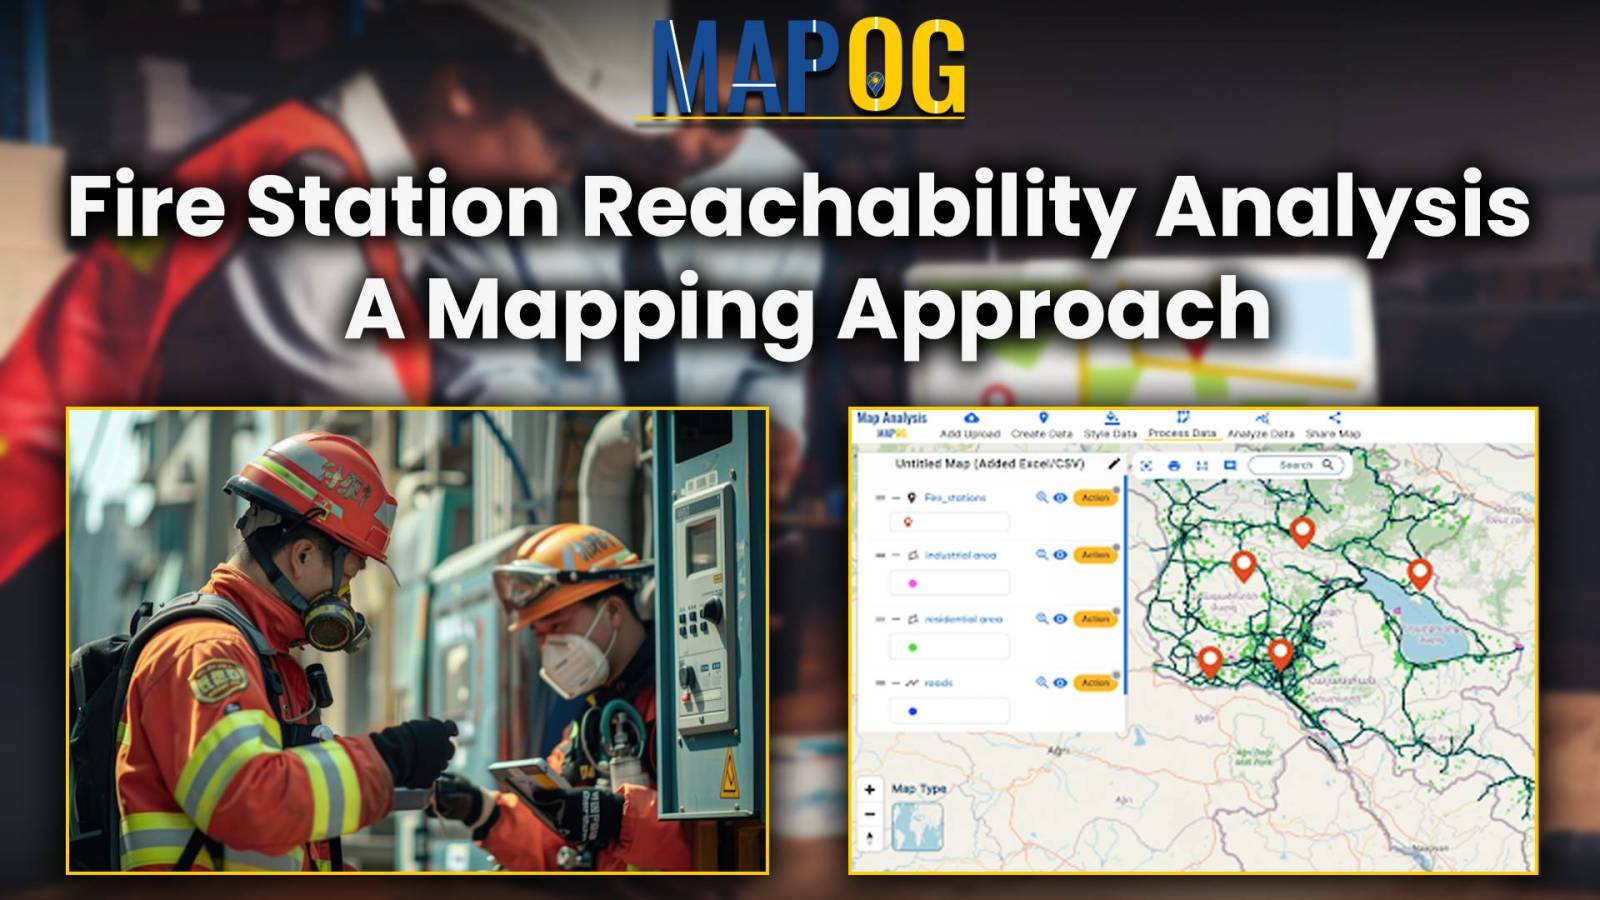 Fire Station Reachability Analysis: A Mapping Approach